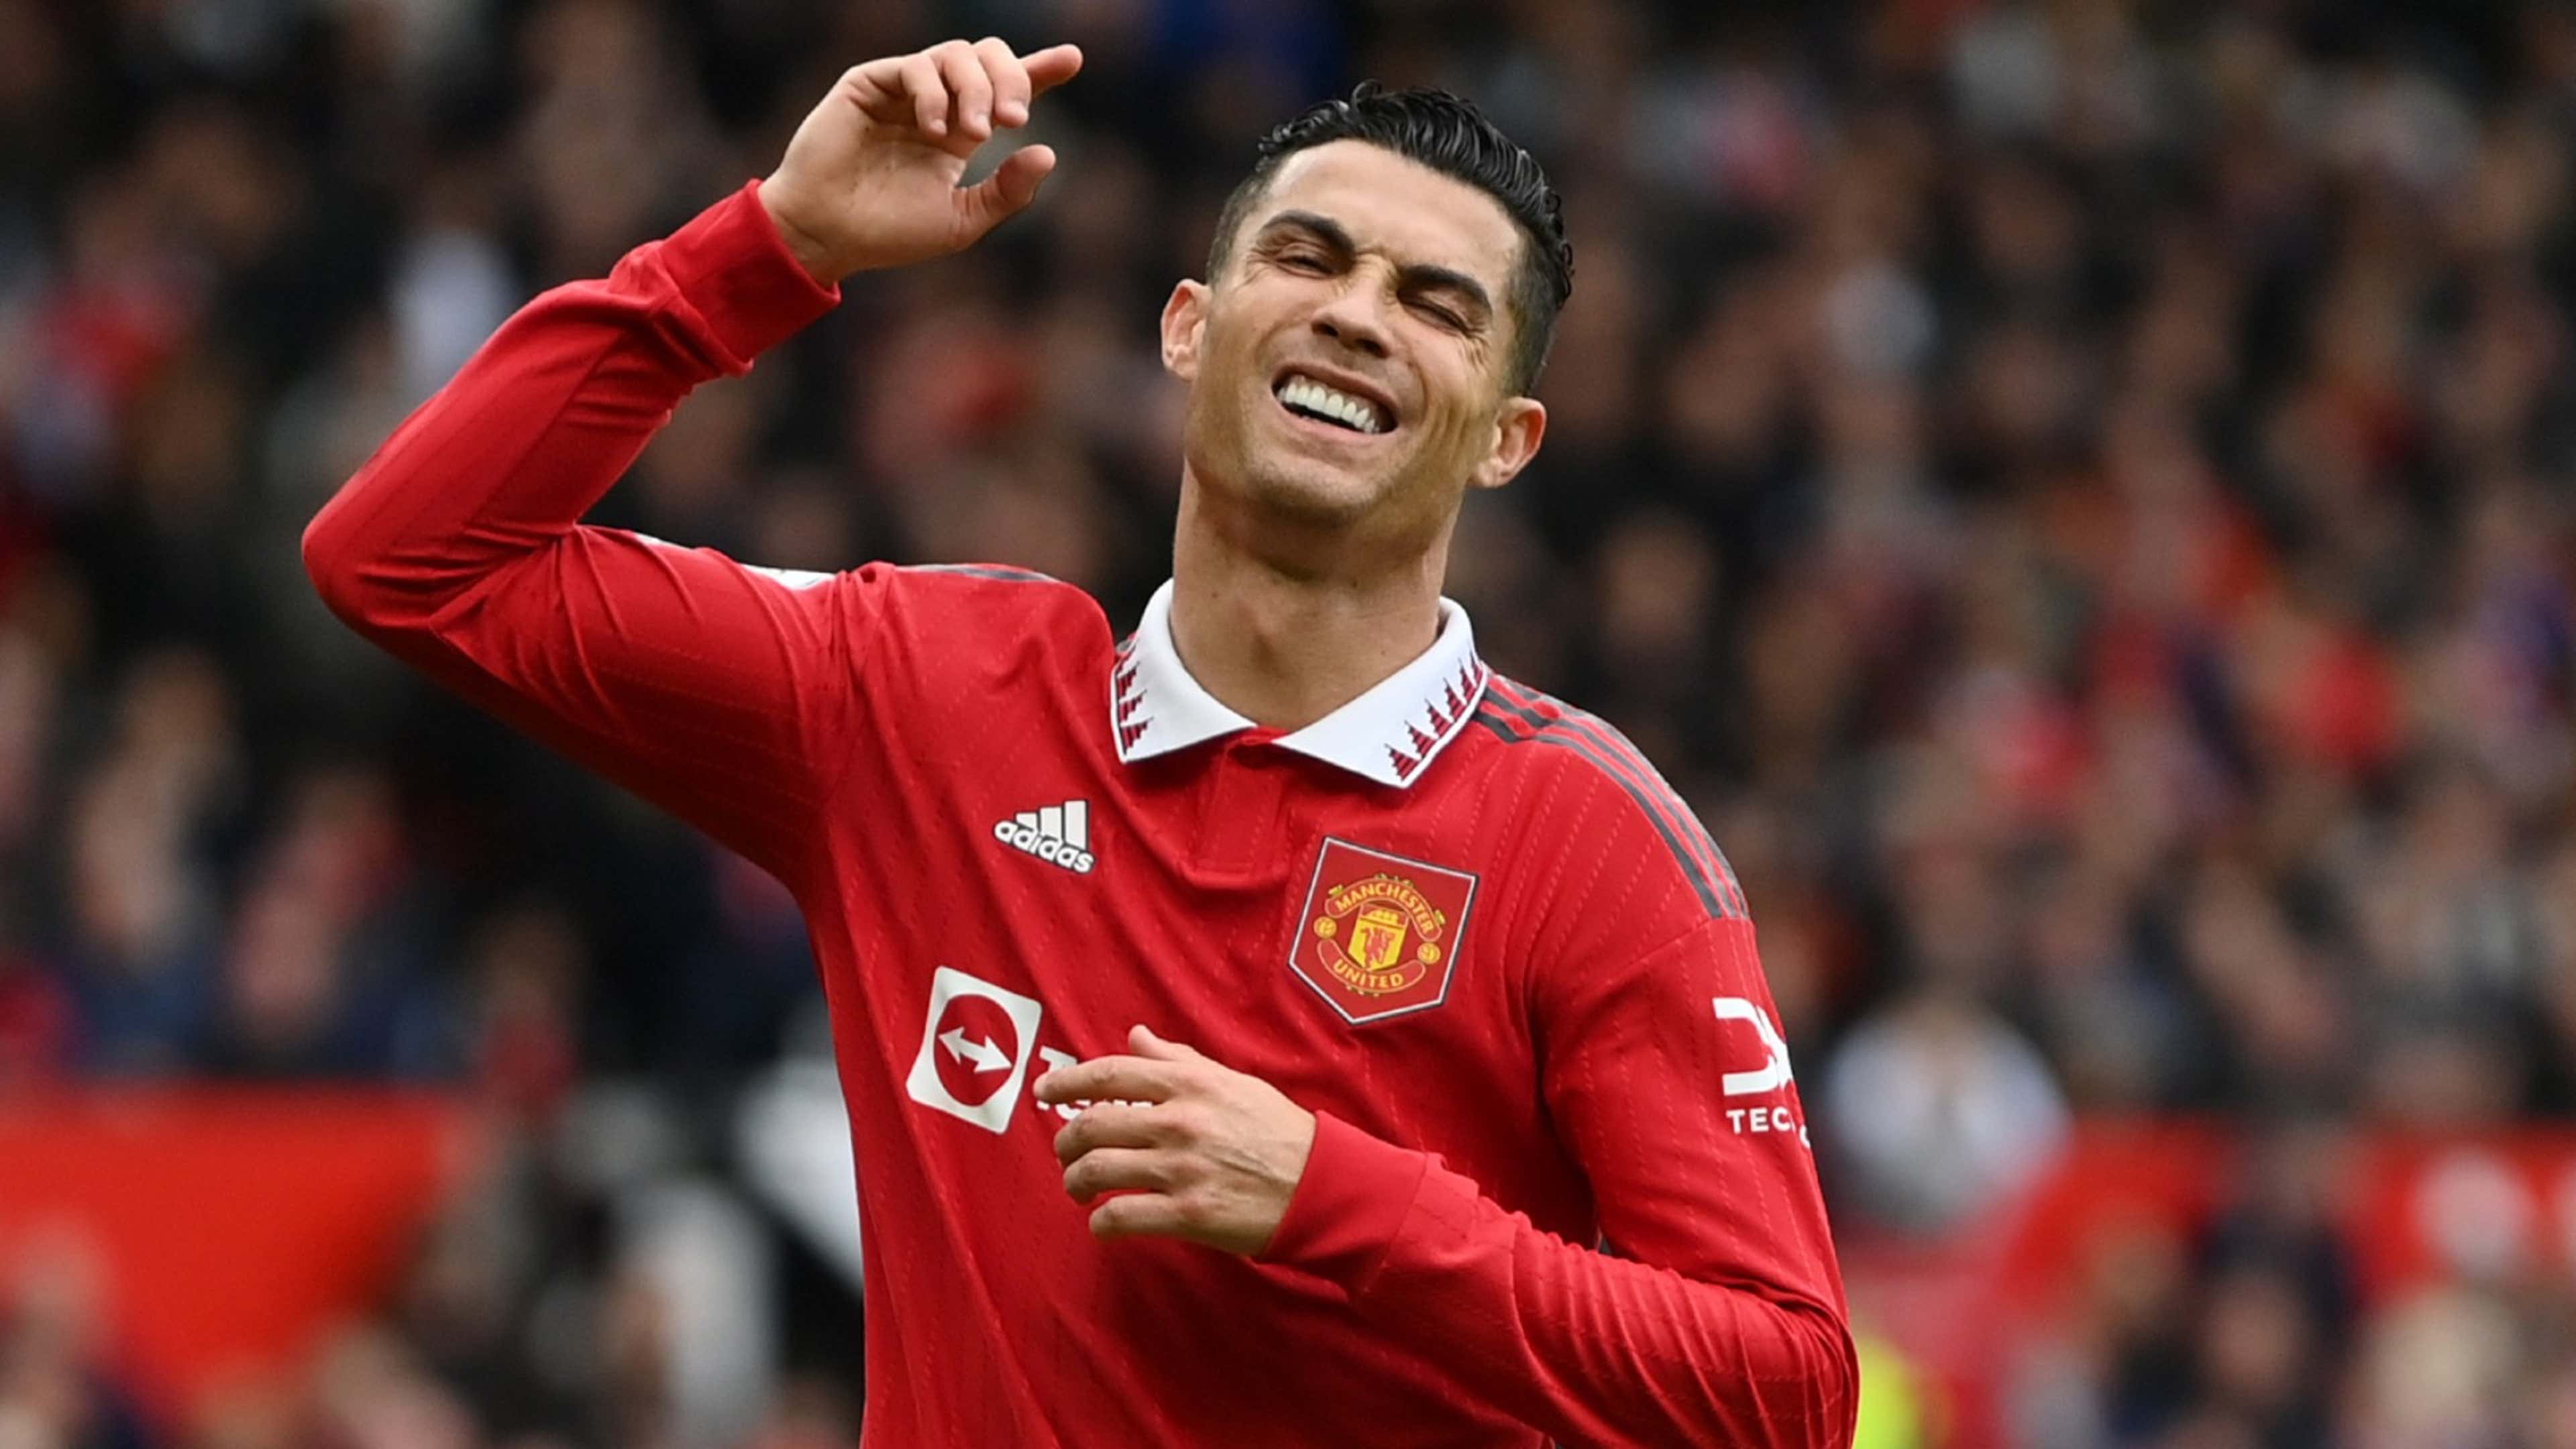 Cristiano Ronaldo's 700th club goal gives Manchester United win at